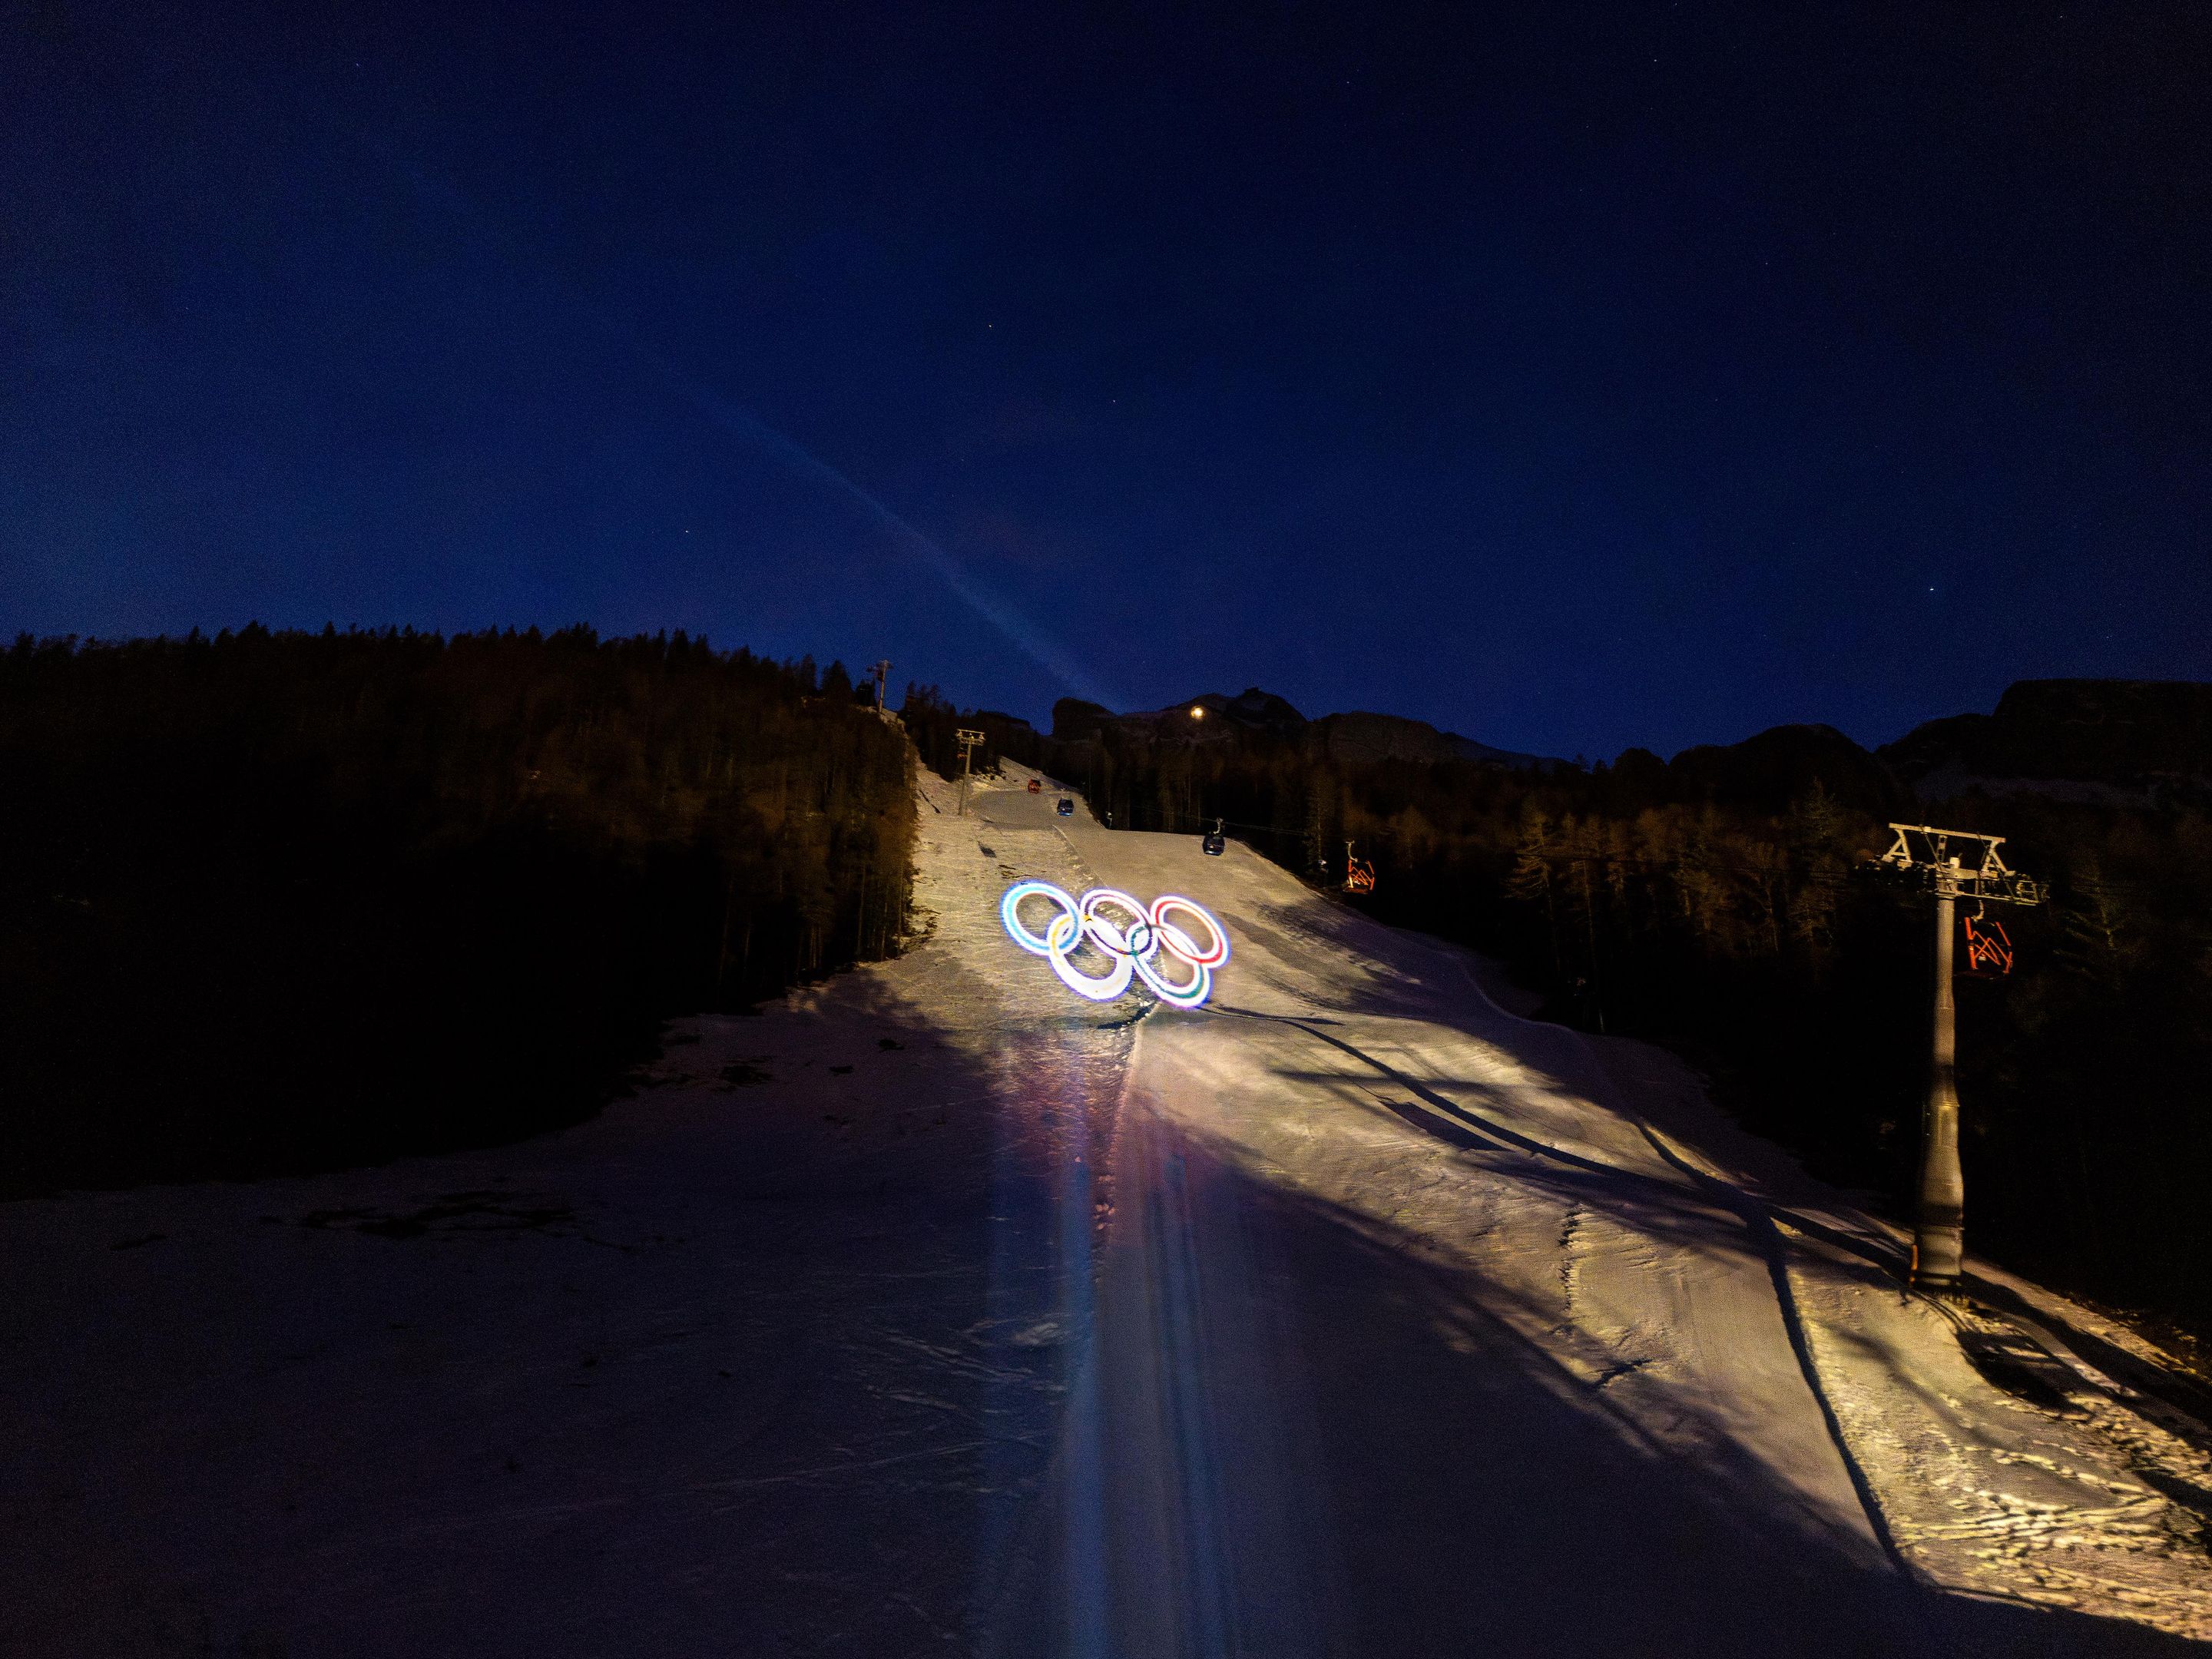 The Olympic Rings illuminate Col Druscie in Cortina d'Ampezzo (©manazproductions)